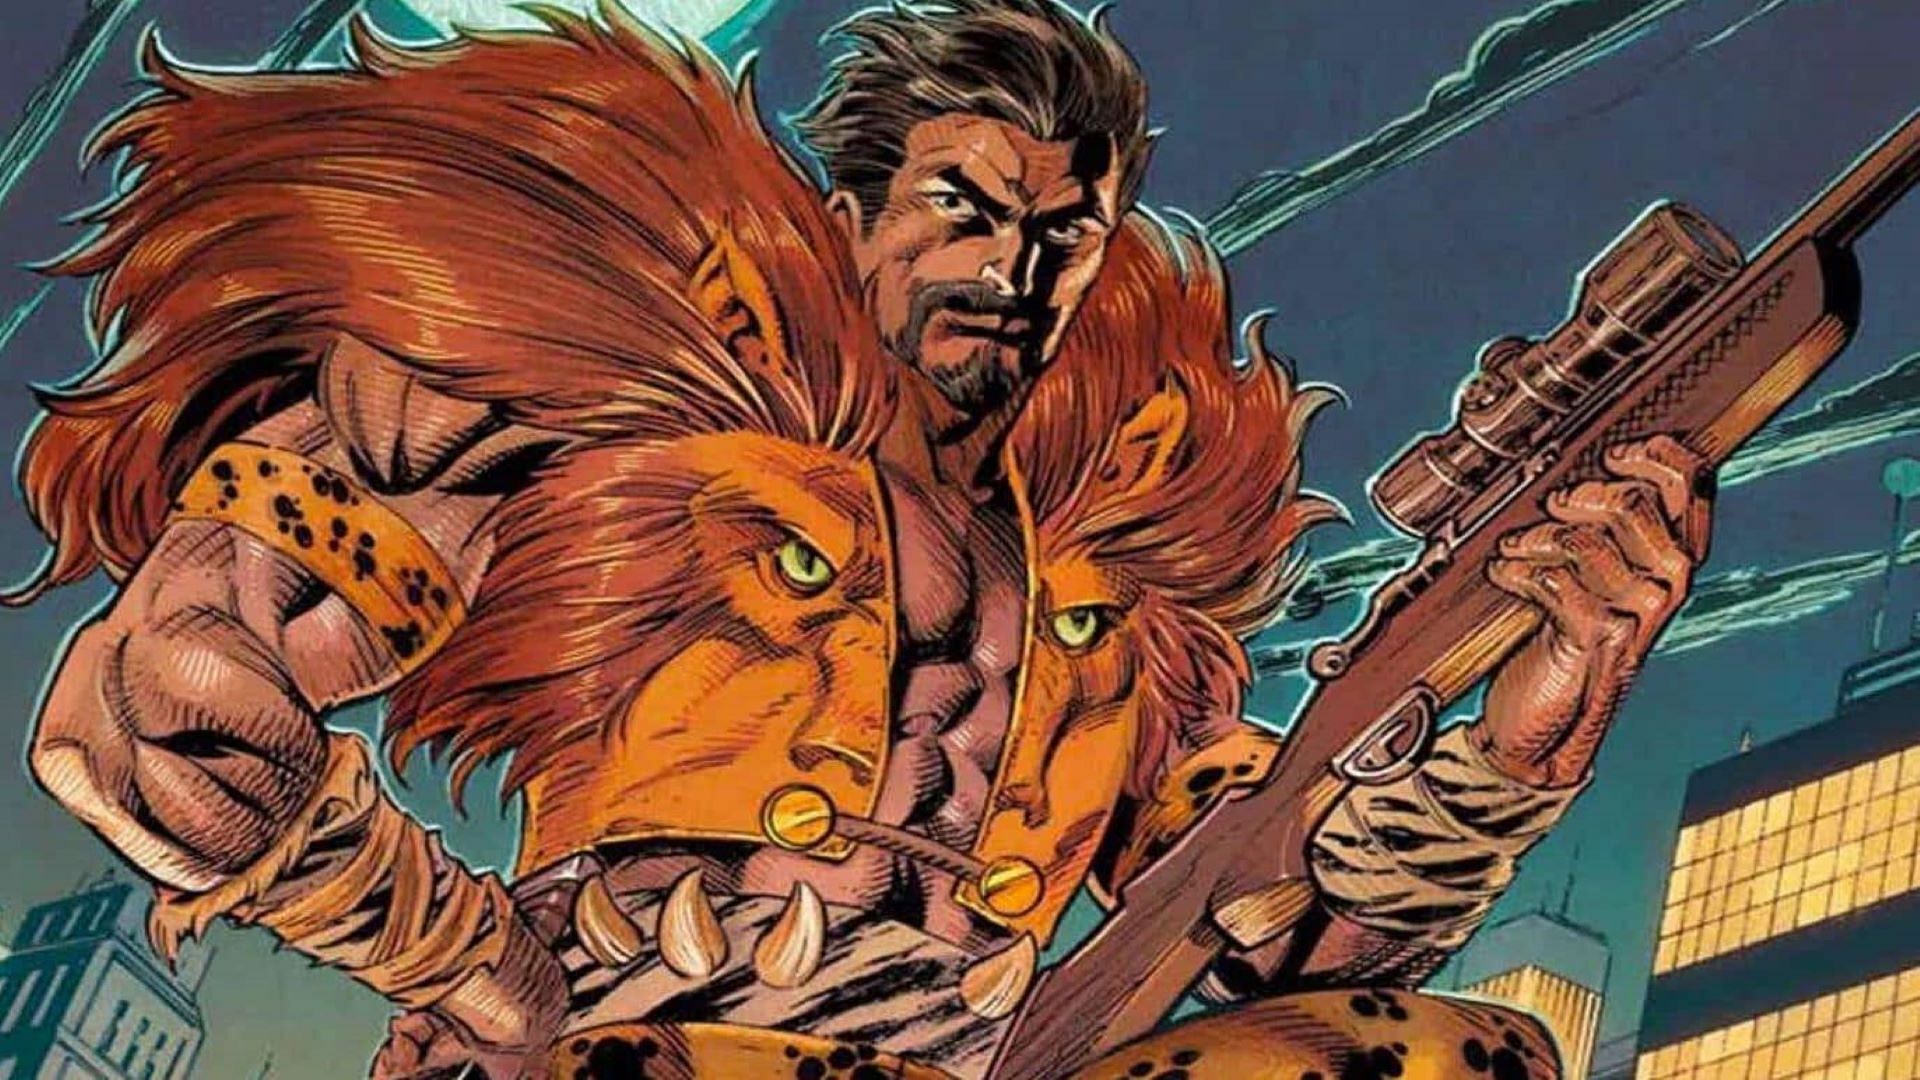 Kraven The Hunter Movie Is Rated R, First Footage Debuts - GameSpot